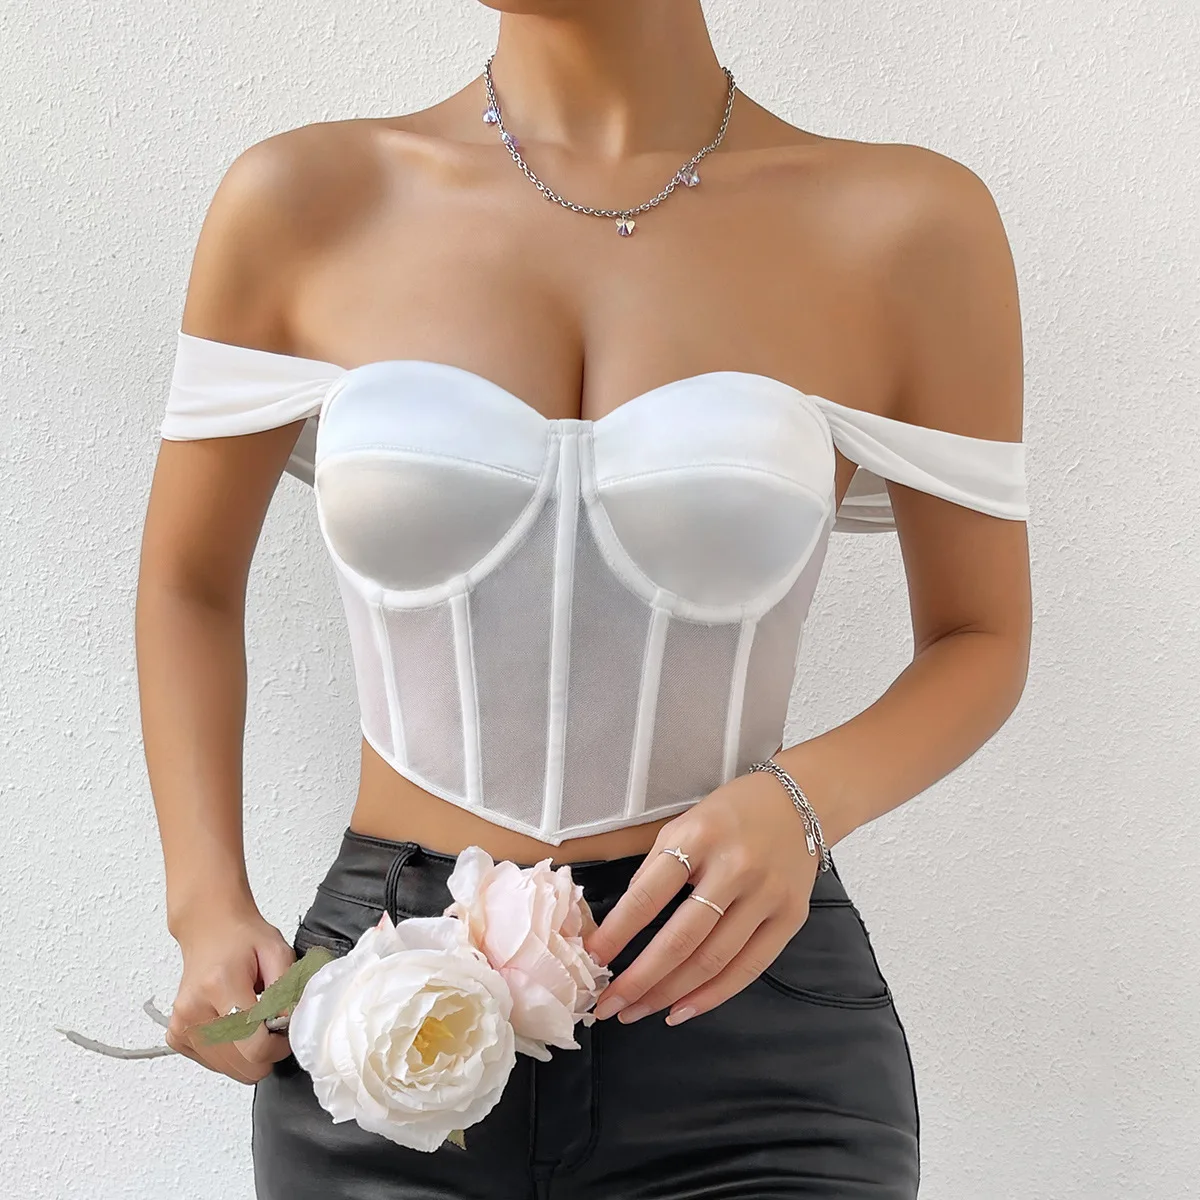 

White Gauze Bustier Women's Elegance Partyclub Camisole Push Up Bralet Tube Top Spaghetti Sexy Off-the-shoulder Underbust Corset